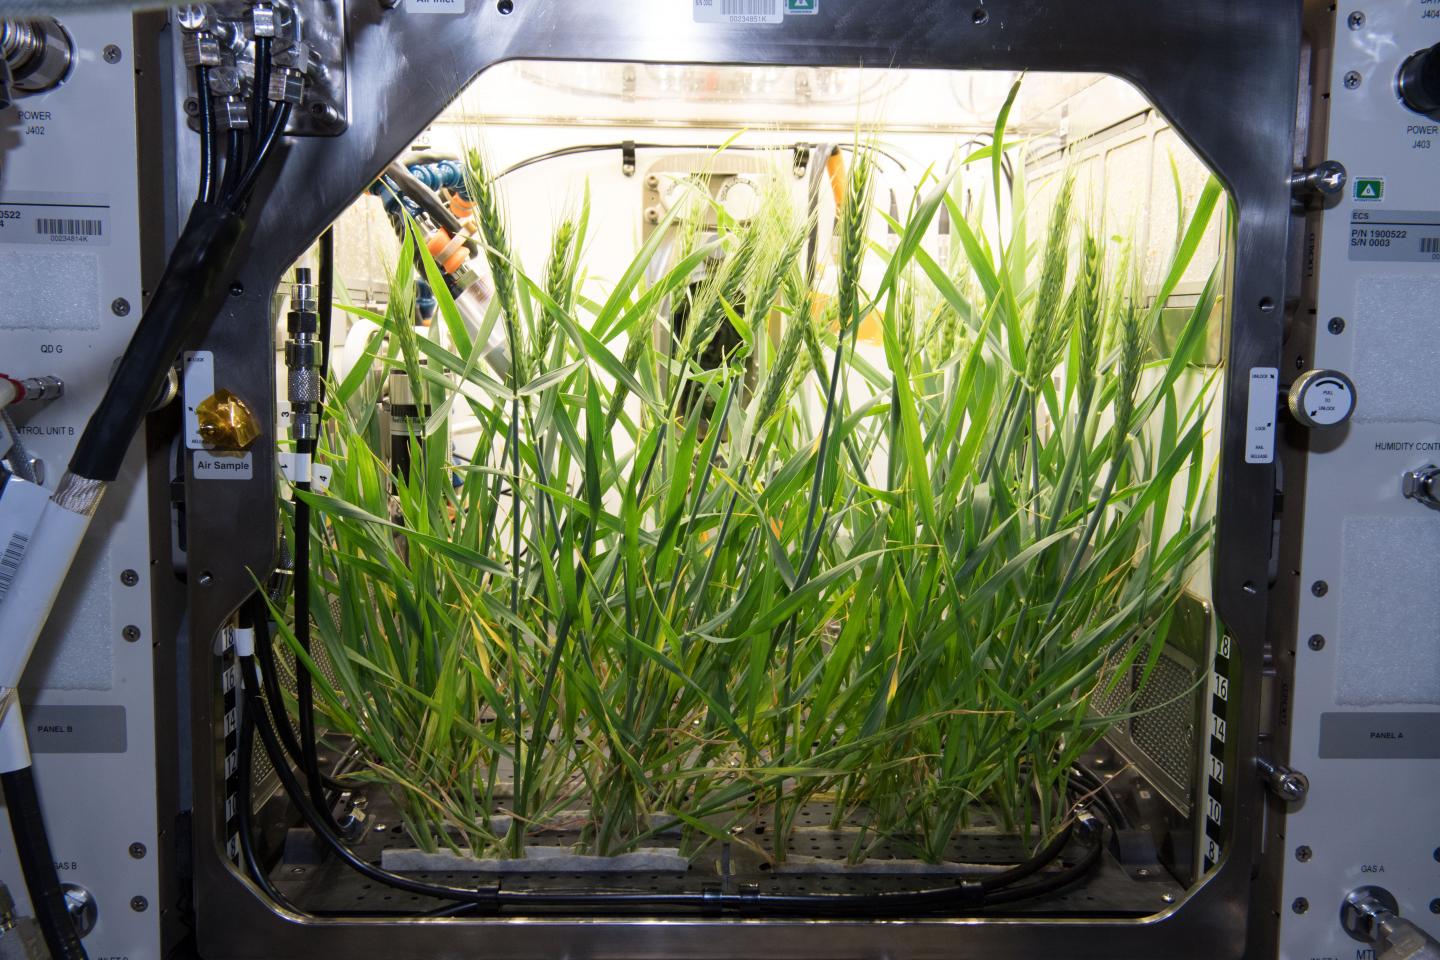 View of Growth Chamber